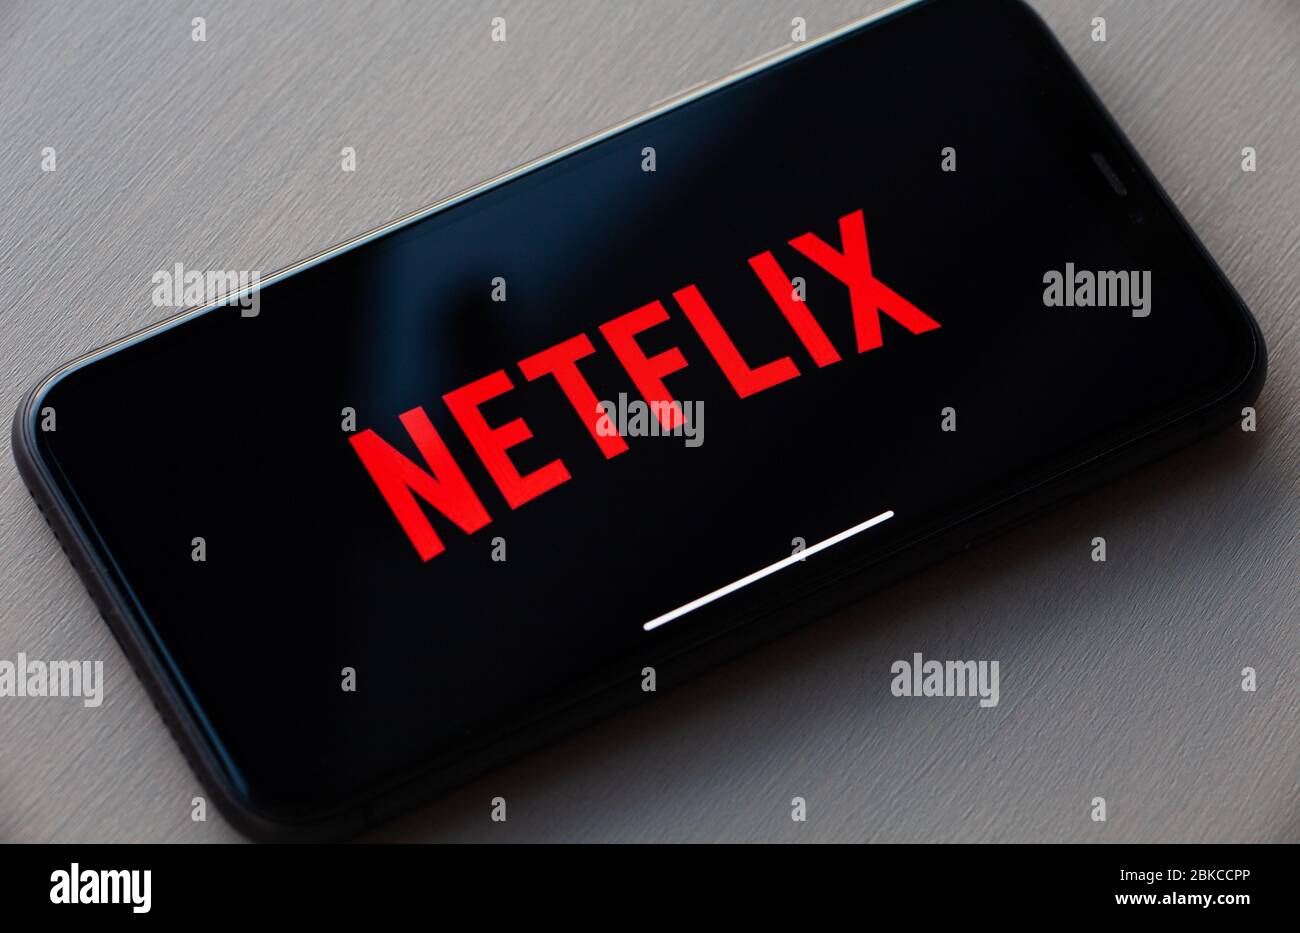 Netflix logo on Apple iPhone 11. Netflix is a global provider of streaming movies and TV series. Stock Photo